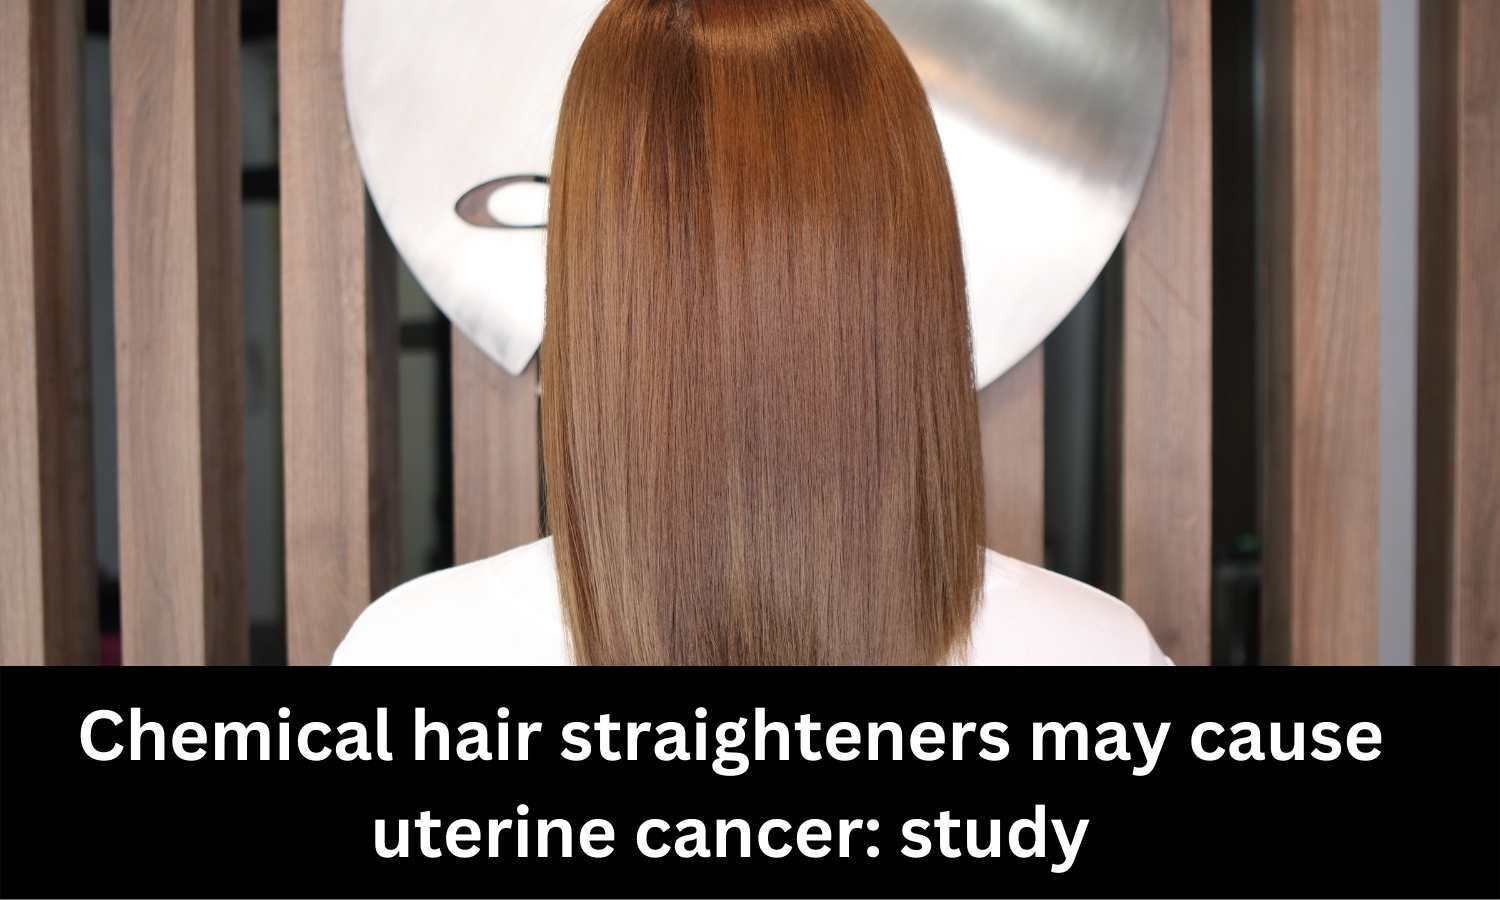 Chemical hair straighteners may cause uterine cancer, says Study